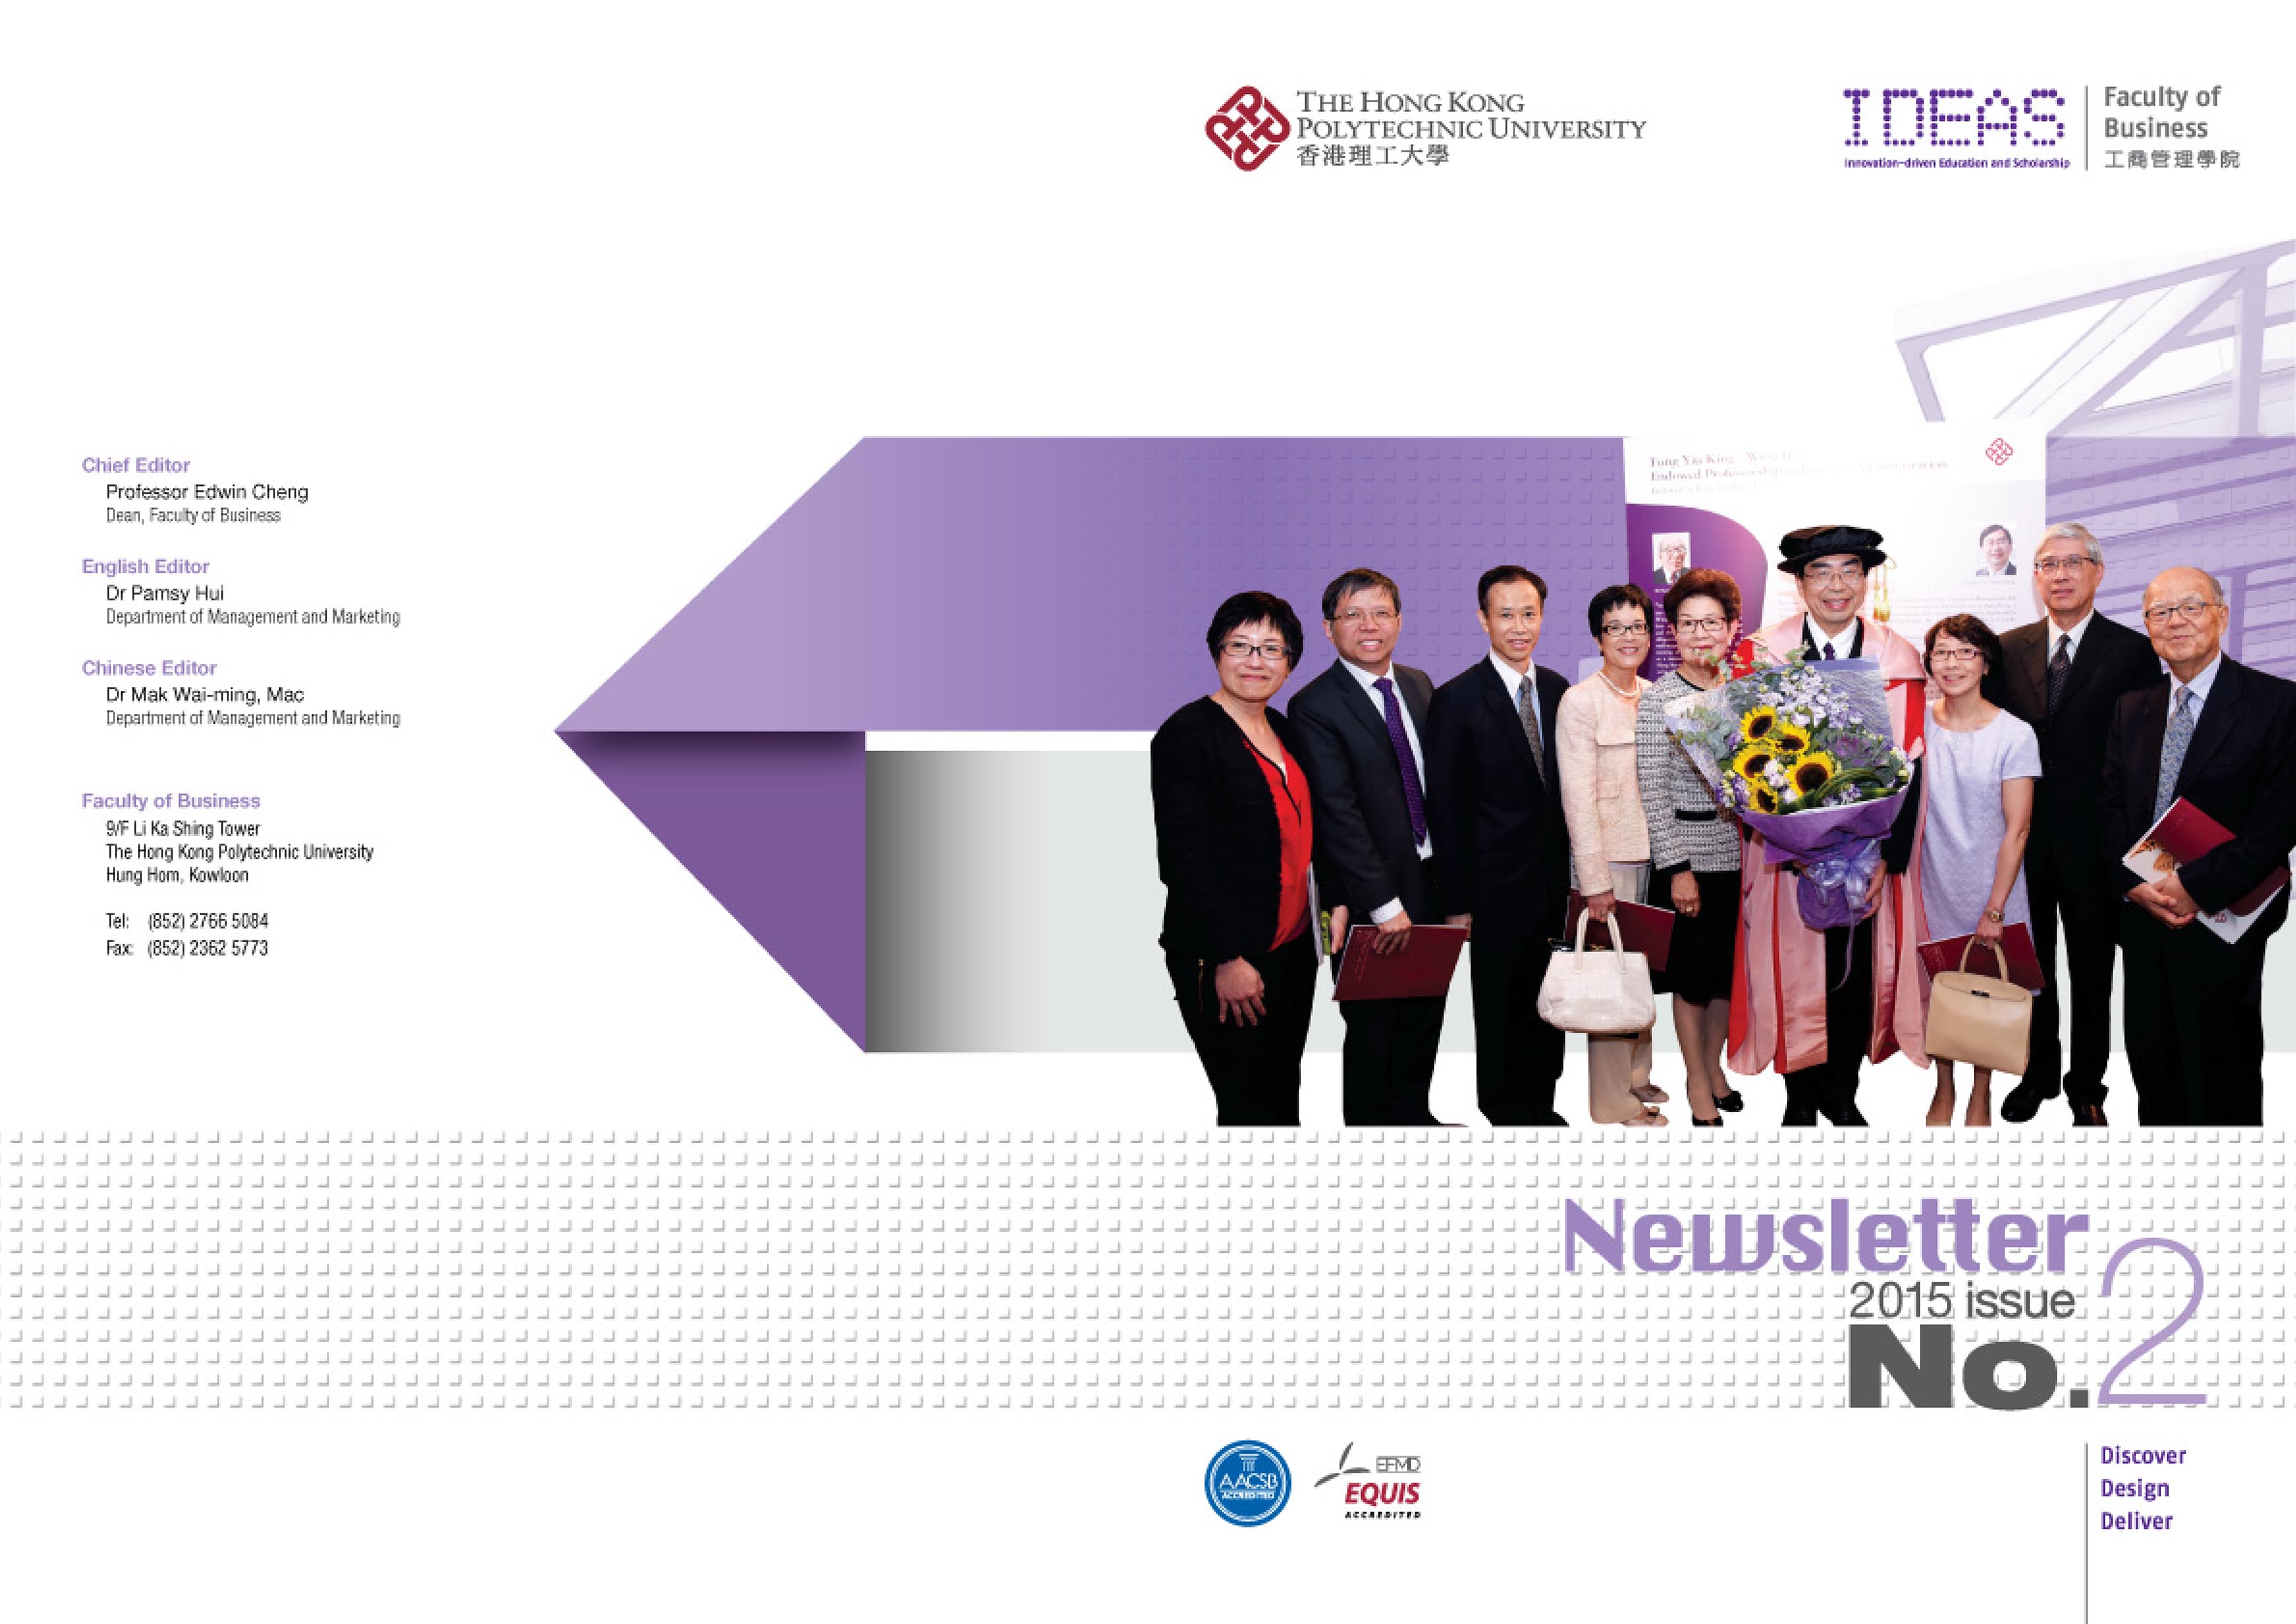 Faculty of Business newsletter. No.2, 2015